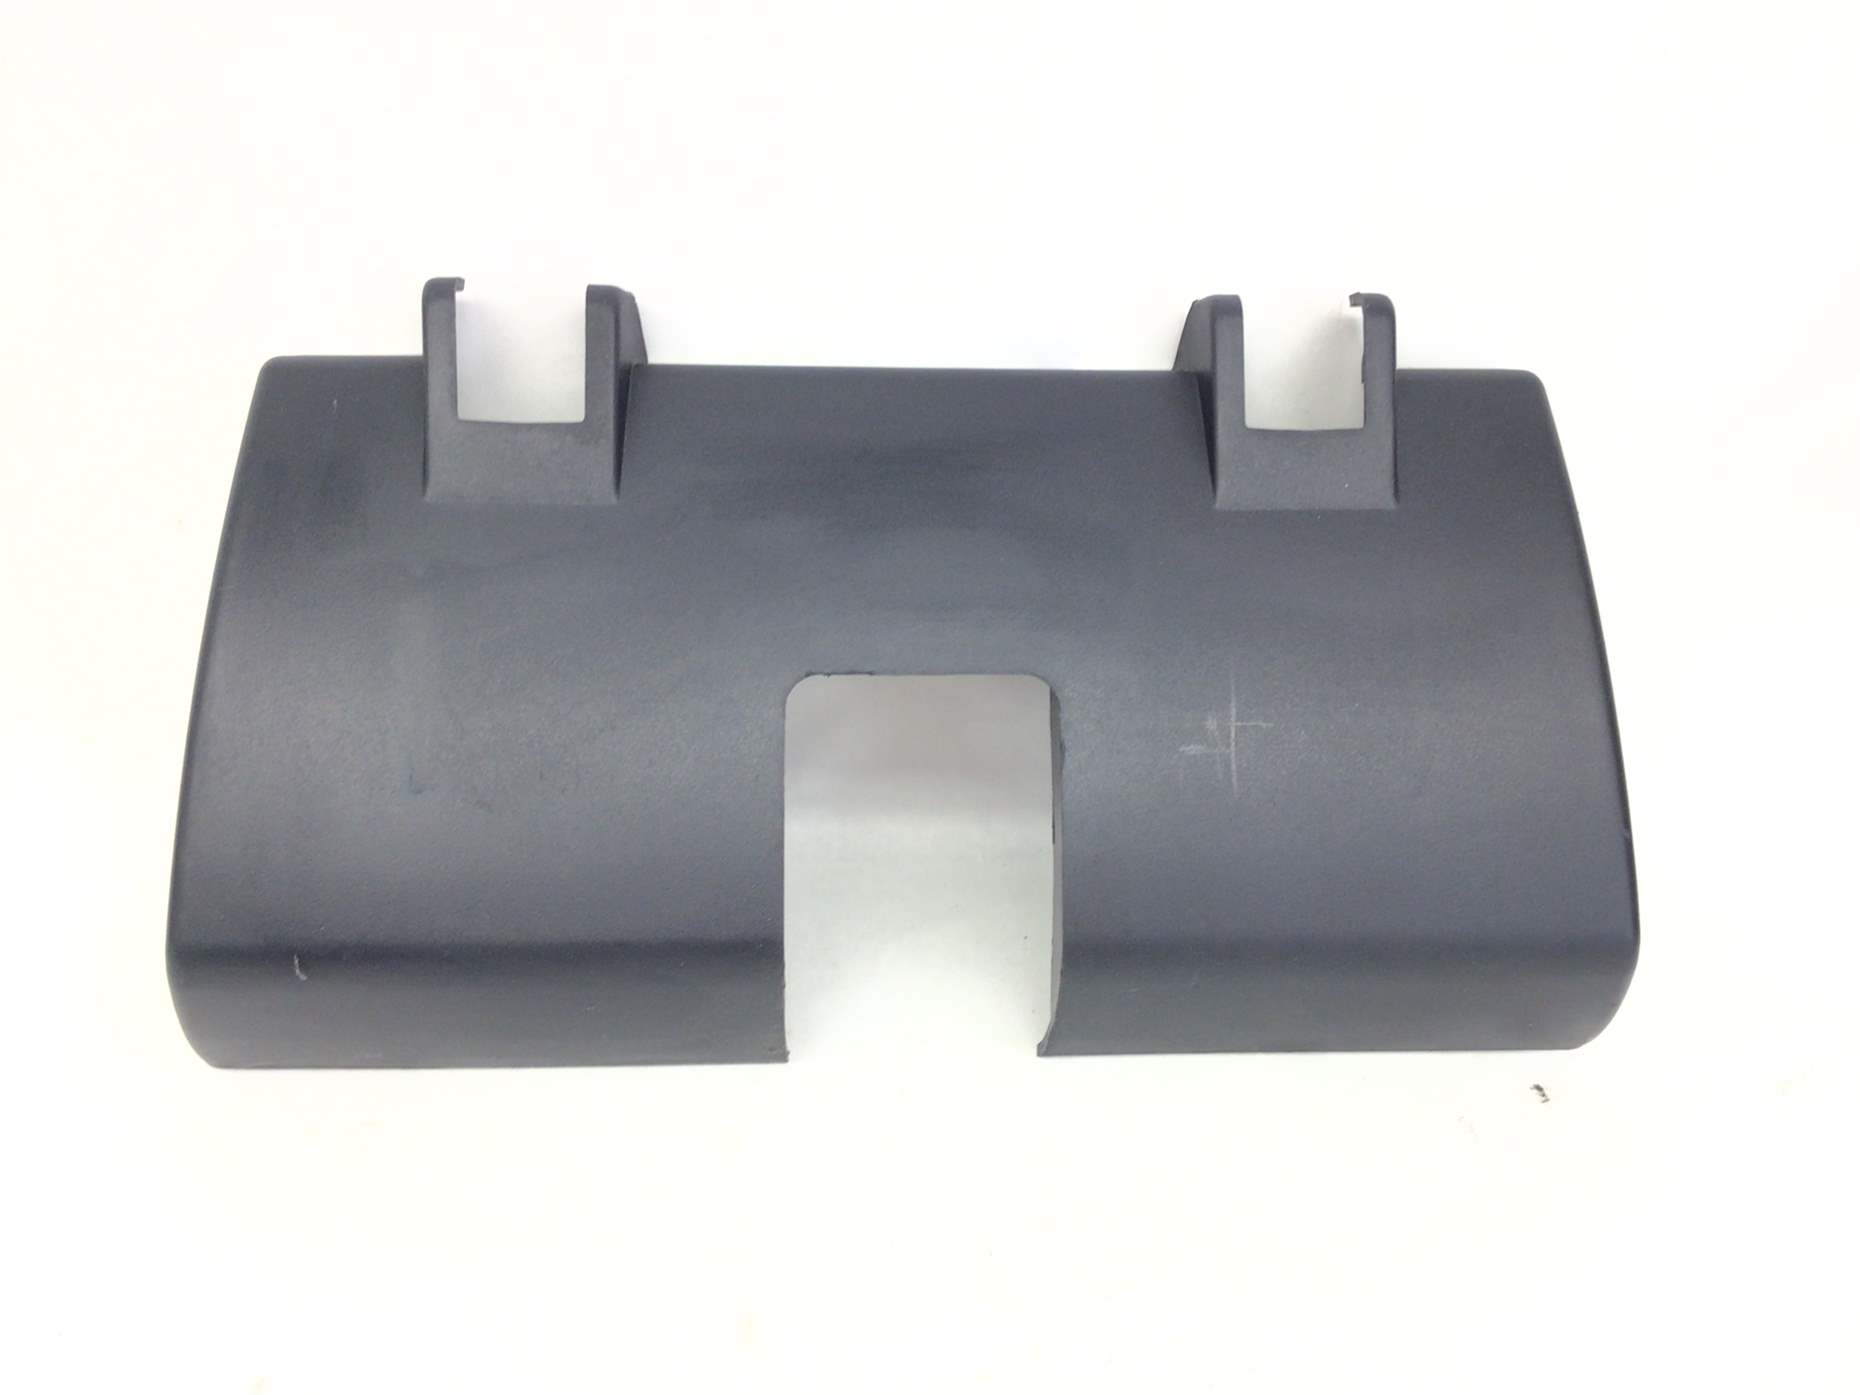 Motor Cover (Used)